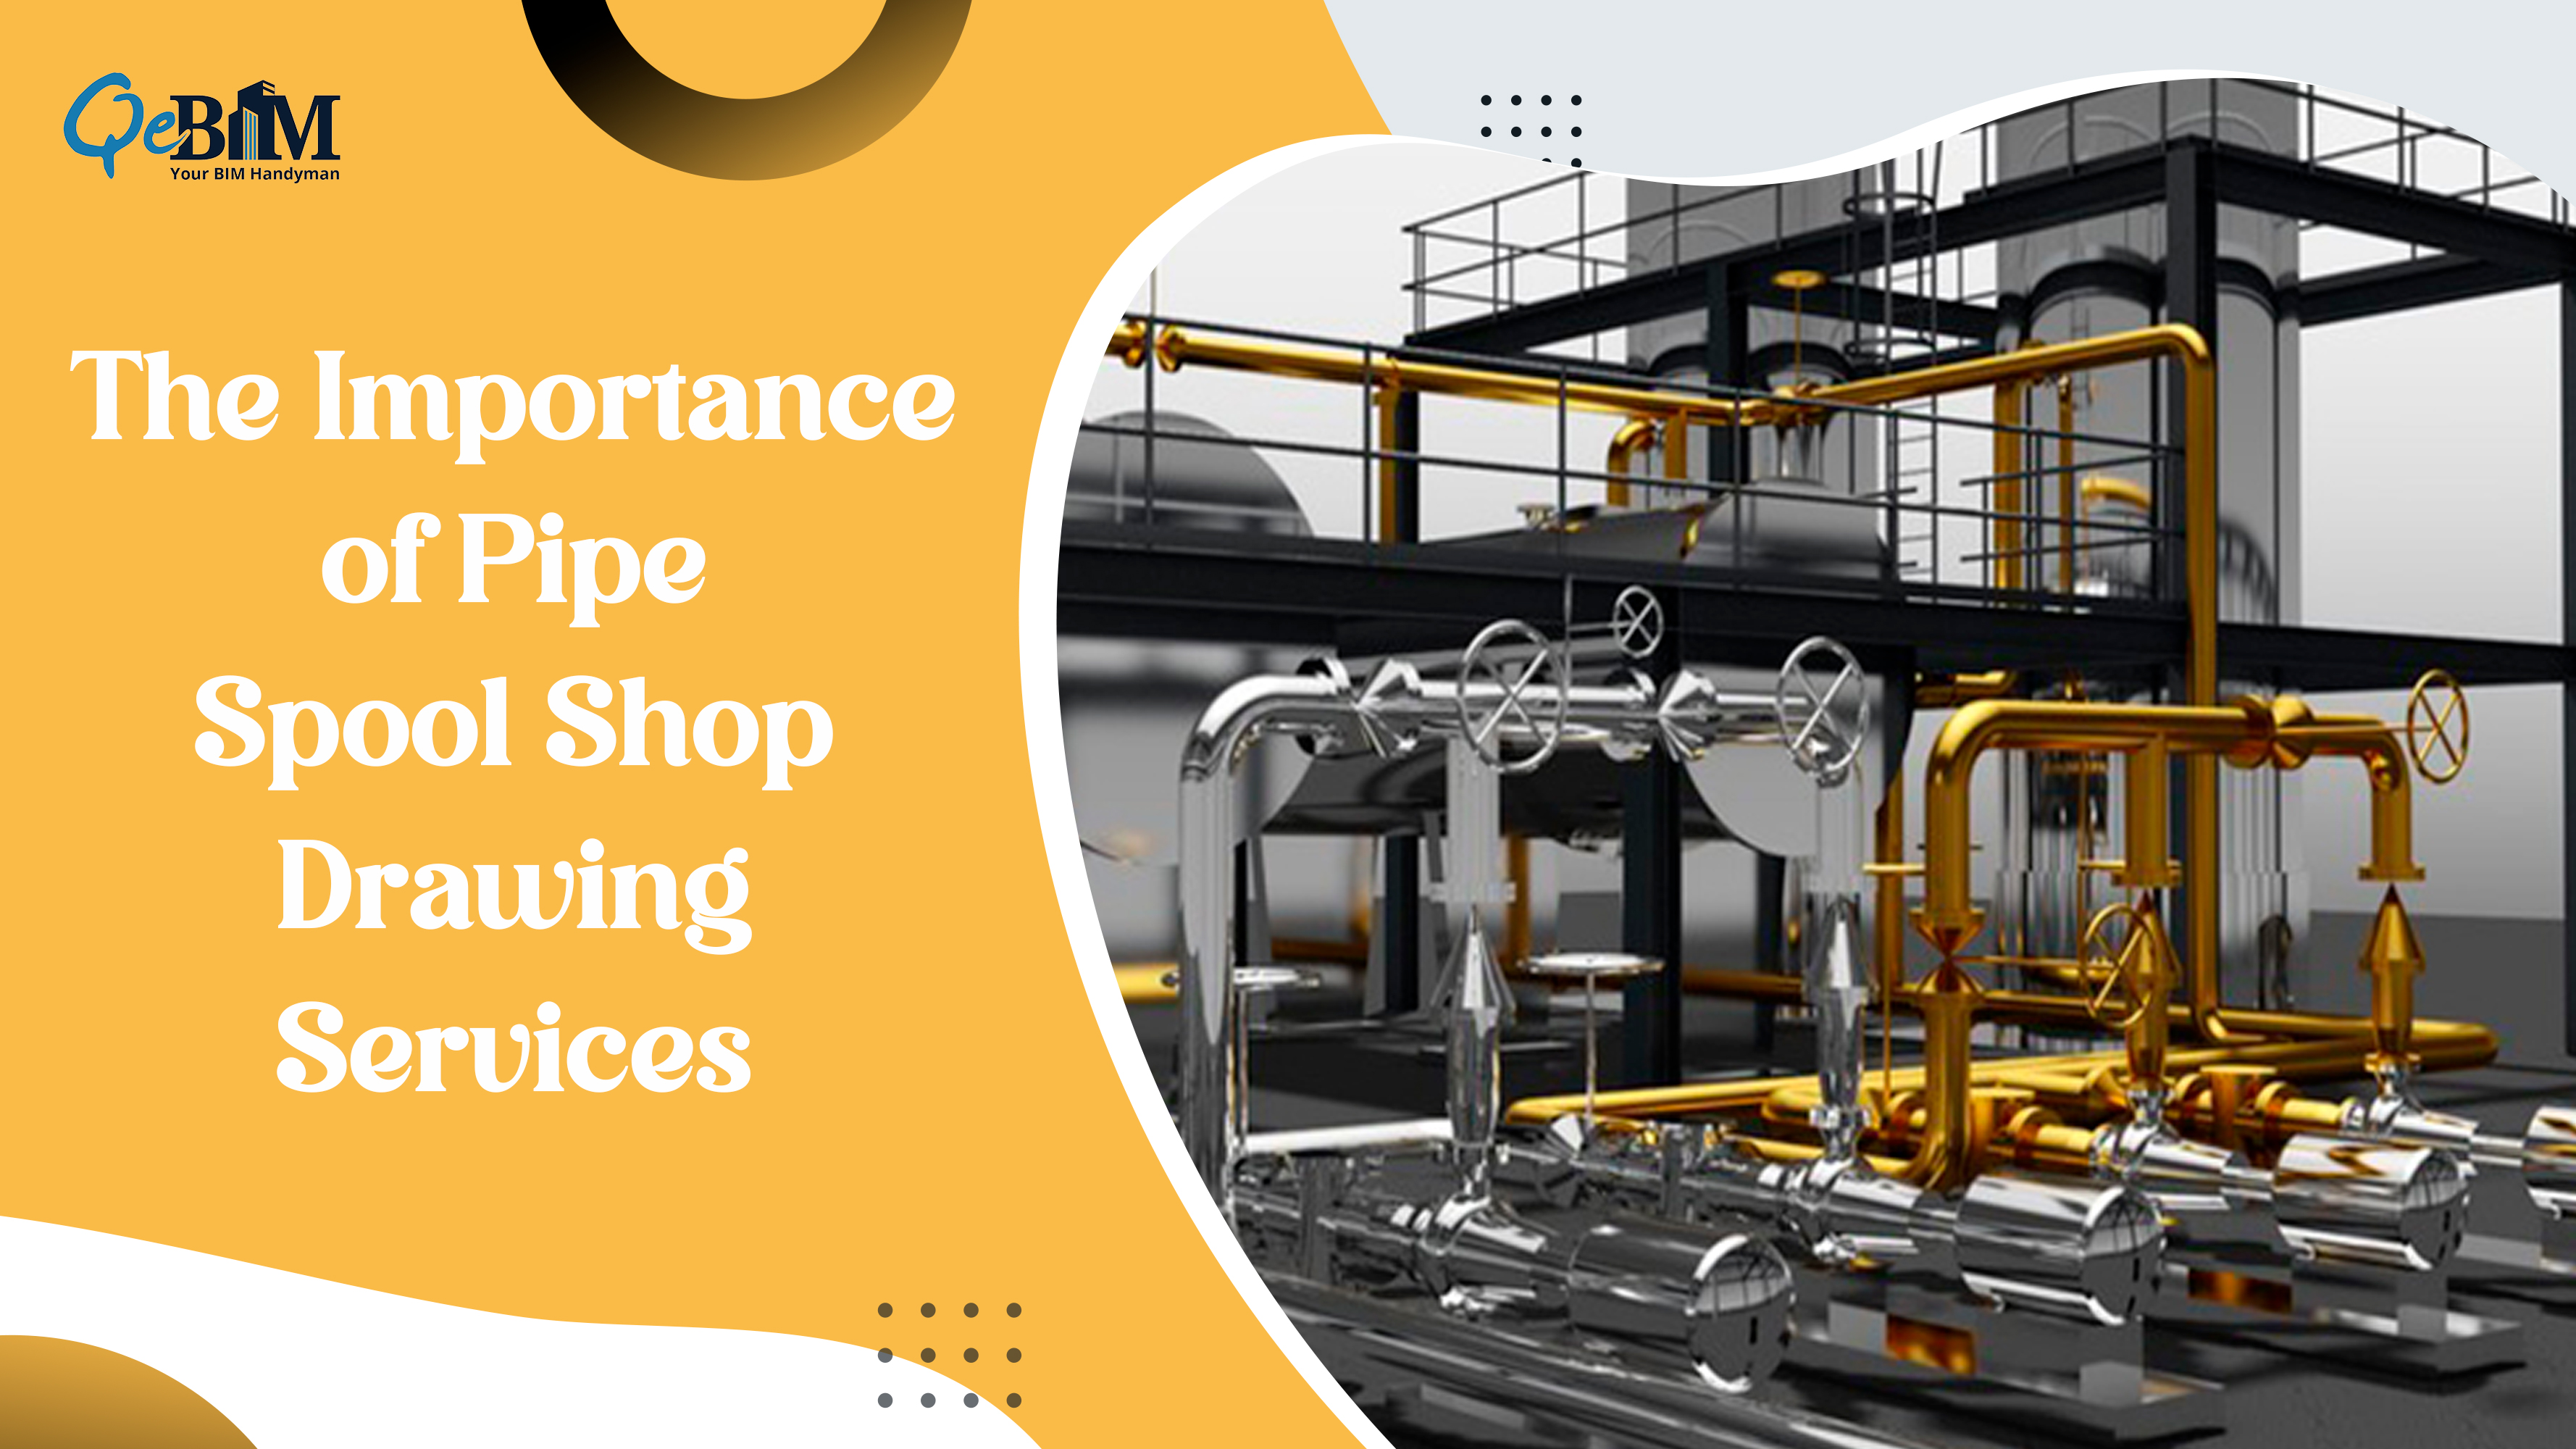 The Importance of Pipe Spool Shop Drawing Services